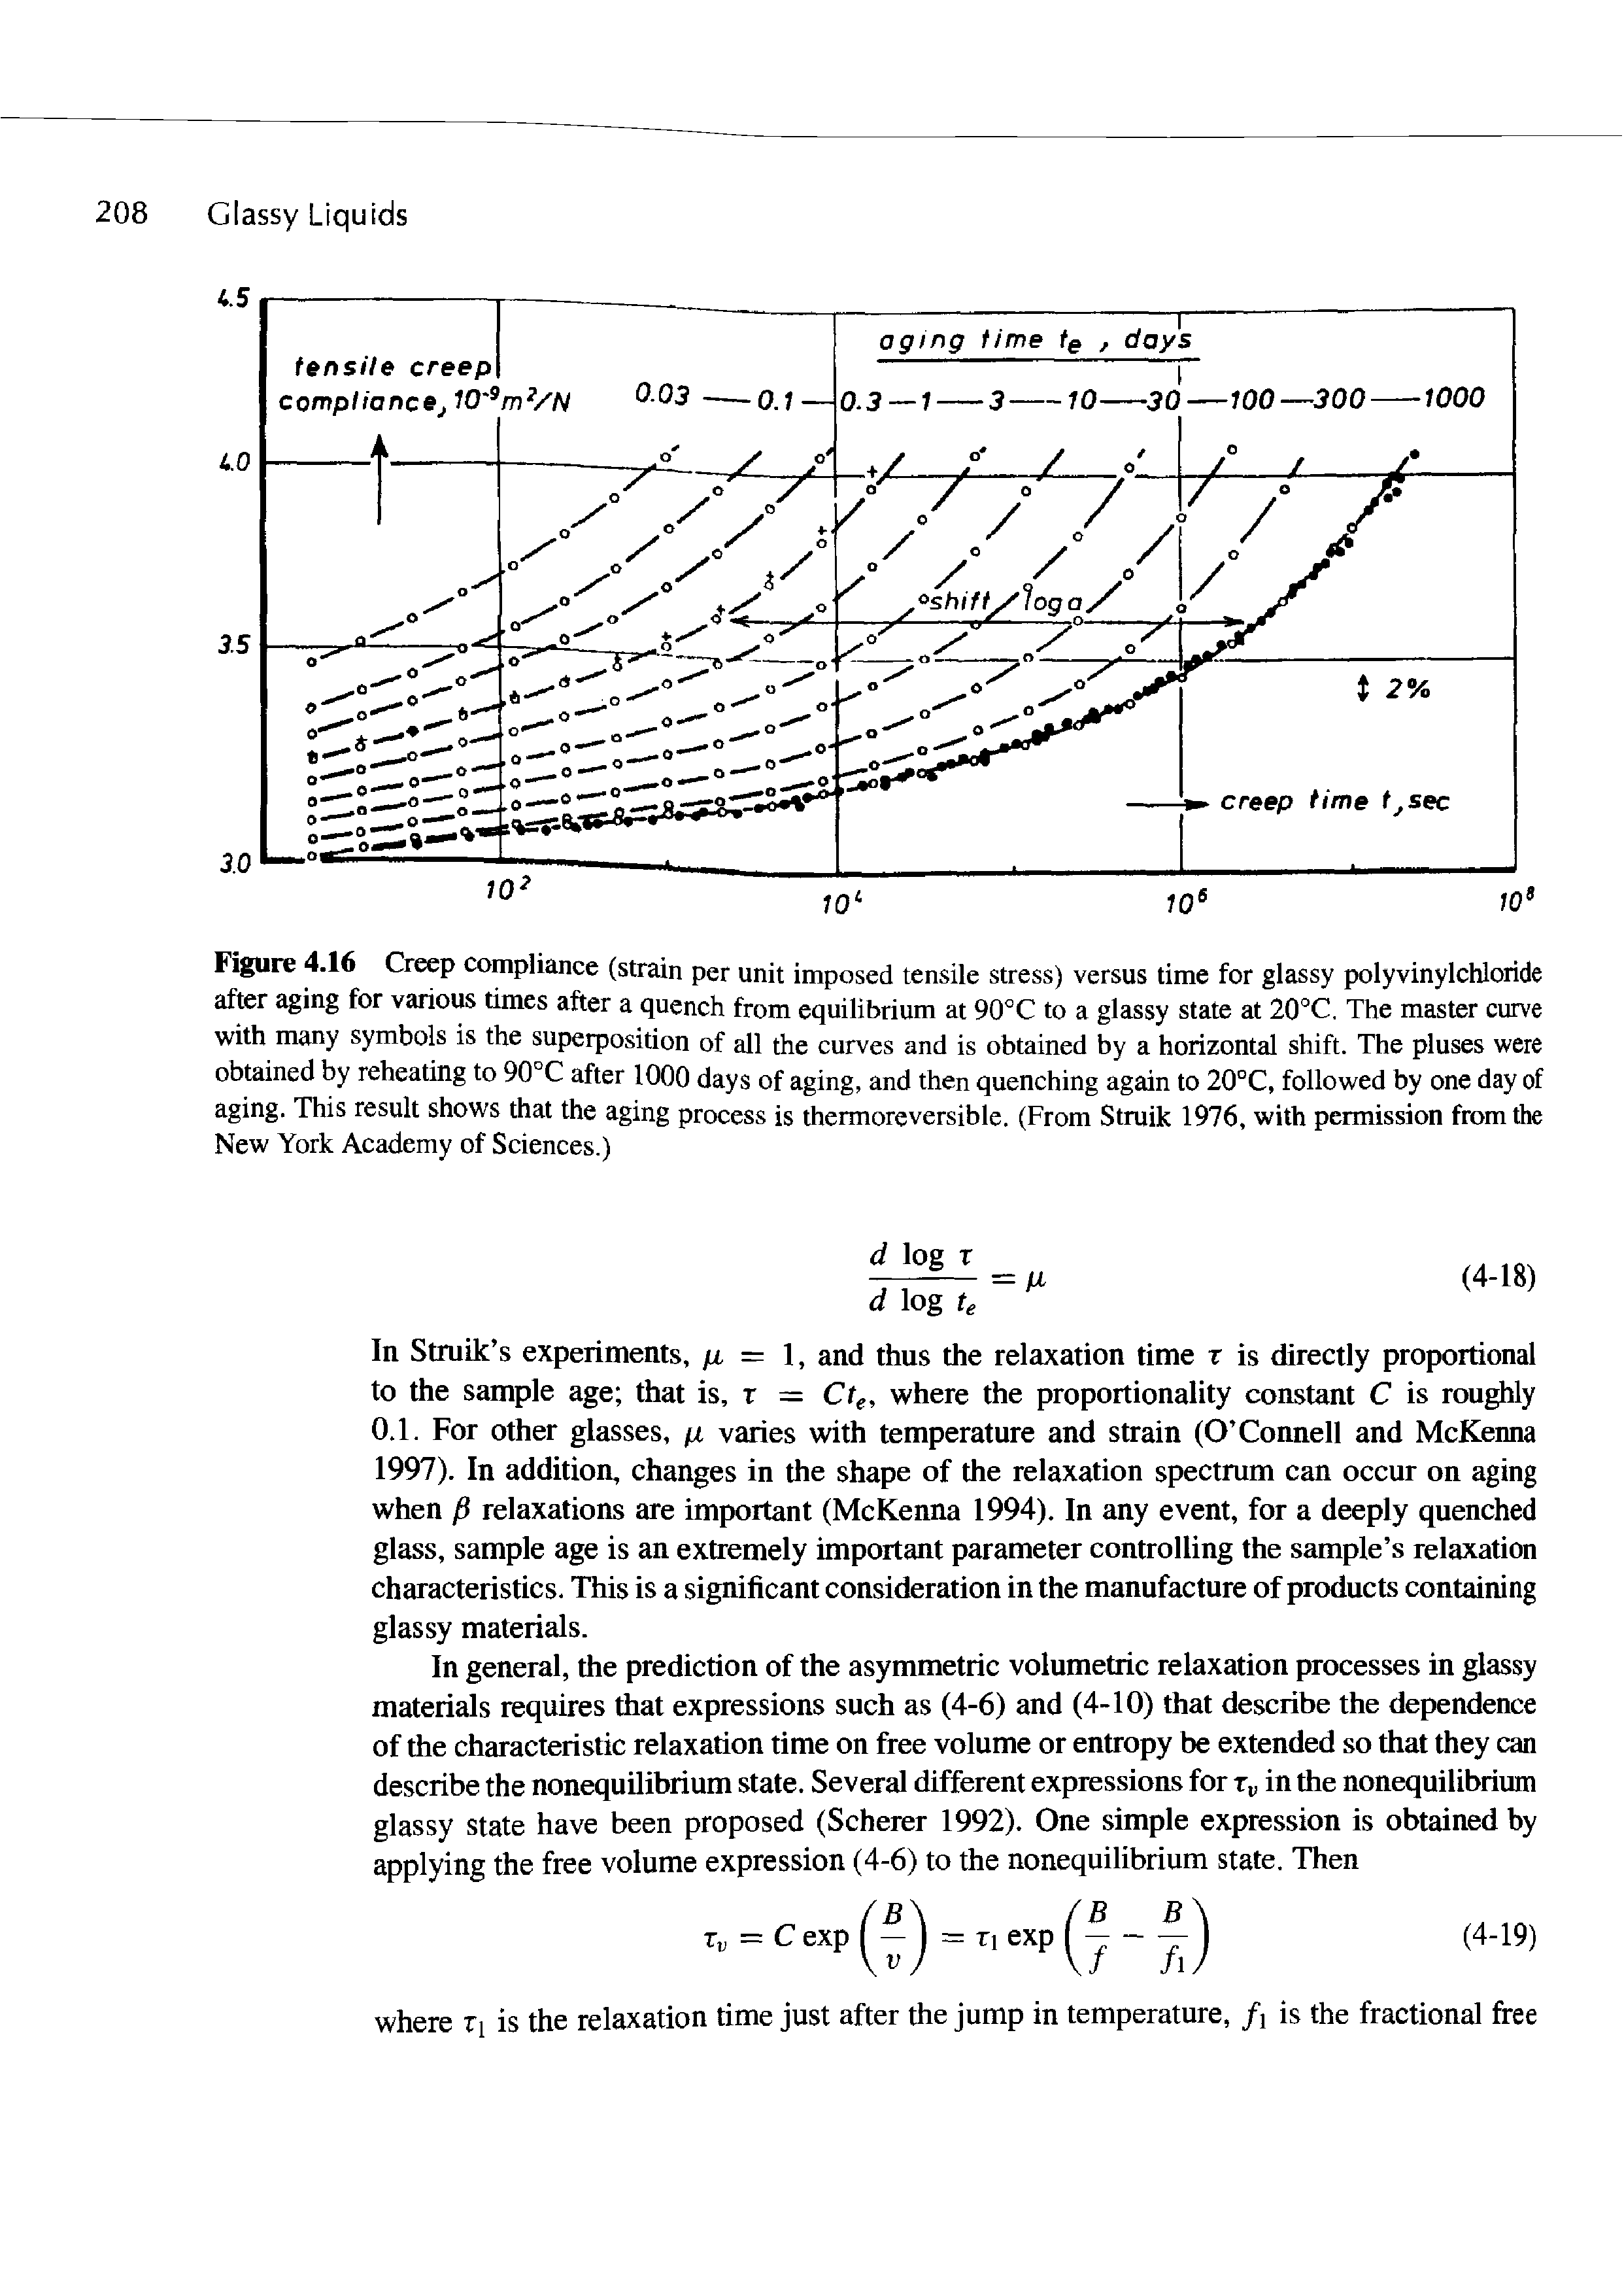 Figure 4.16 Creep compliance (strain per unit imposed tensile stress) versus time for glassy polyvinylchloride after aging for various times after a quench from equilibrium at 90°C to a glassy state at 20°C. The master curve with many symbols is the superposition of all the curves and is obtained by a horizontal shift. The pluses were obtained by reheating to 90 C after 1000 days of aging, and then quenching again to 20°C, followed by one day of aging. This result shows that the aging process is thermoreversible. (From Struik 1976, with permission from the New York Academy of Sciences.)...